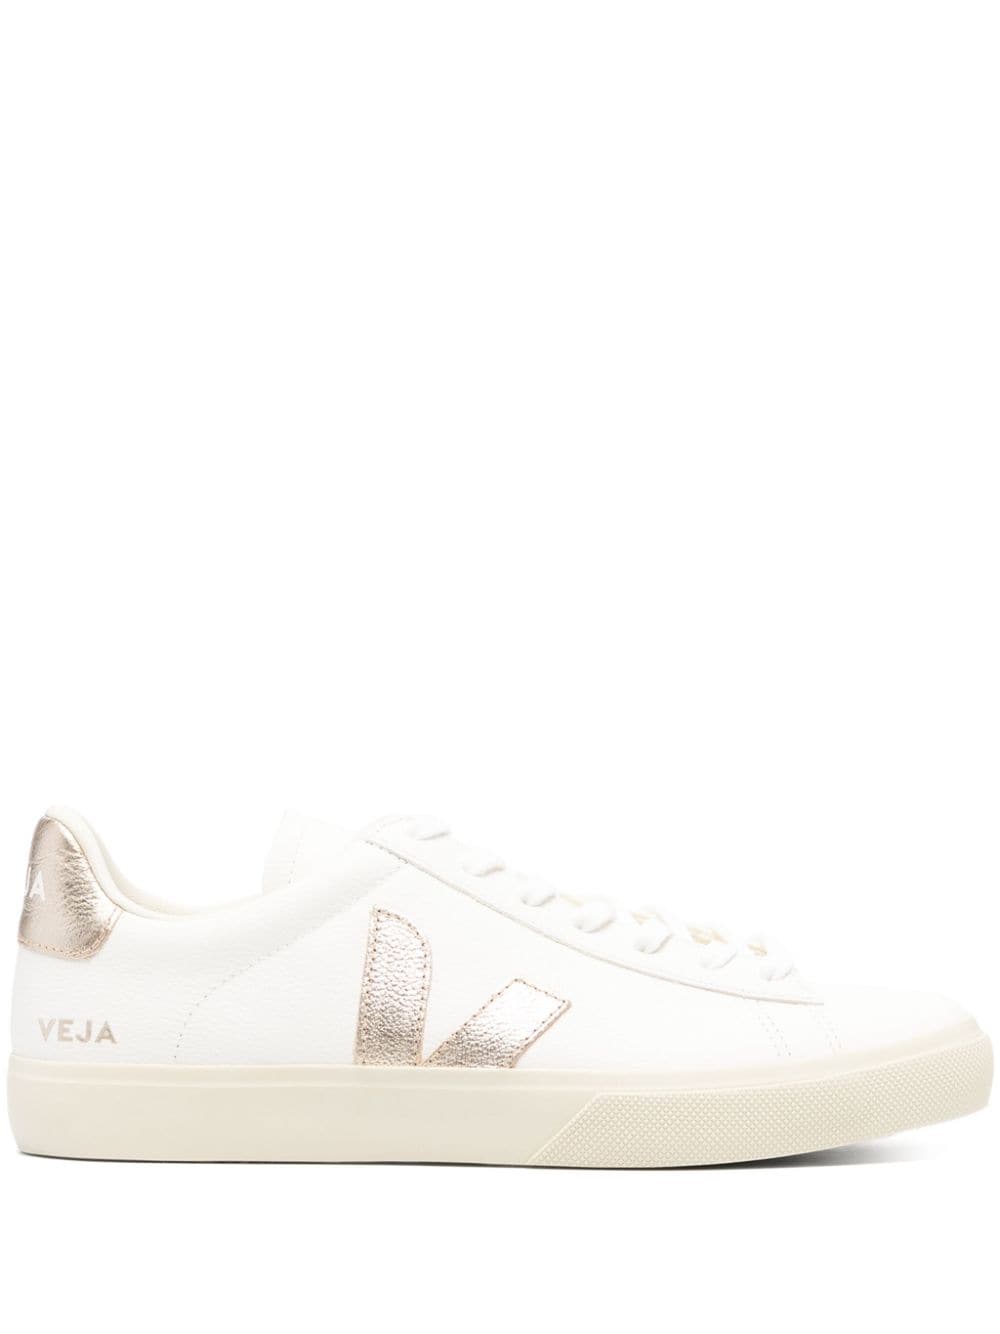 VEJA Campo grained leather sneakers - White von VEJA